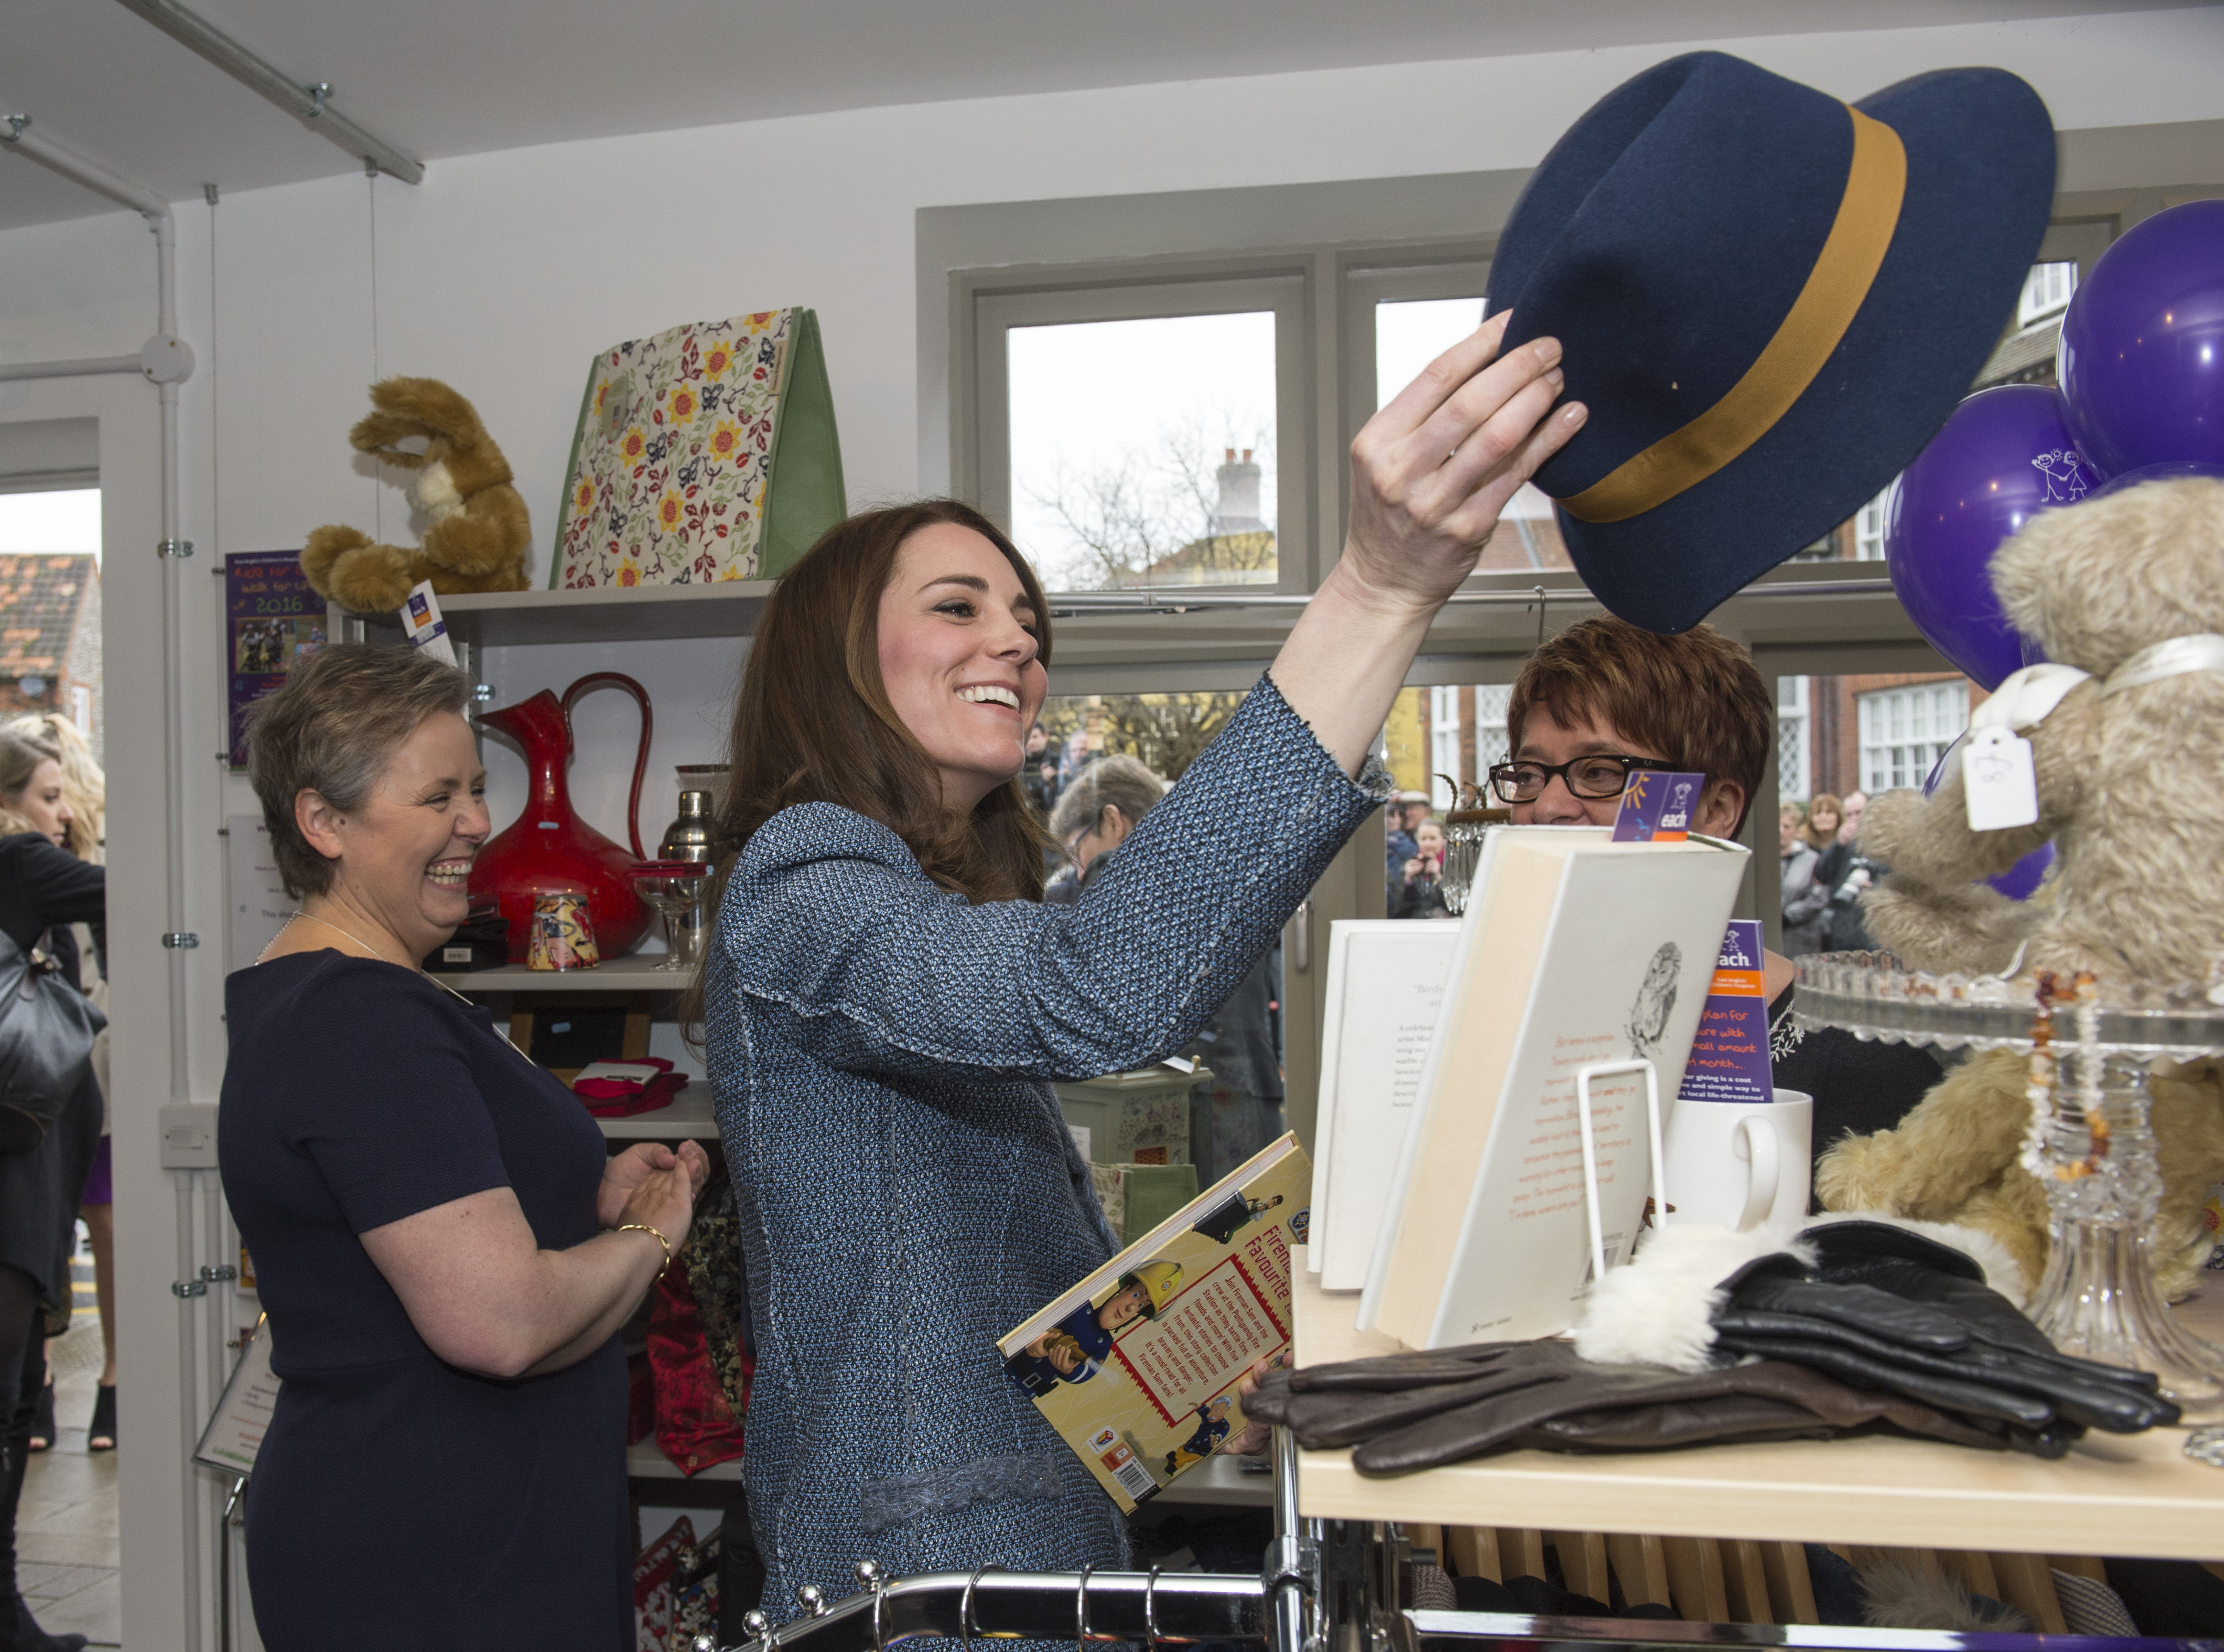 HOLT, UNITED KINGDOM - MARCH 18:  Catherine, Duchess of Cambridge tries on a Boden hat, priced at £15, as she takes a tour of the new EACH charity shop that she officially opened earlier today on March 18, 2016 in Holt, United Kingdom. (Photo by Arthur Edwards - WPA Pool/Getty Images)